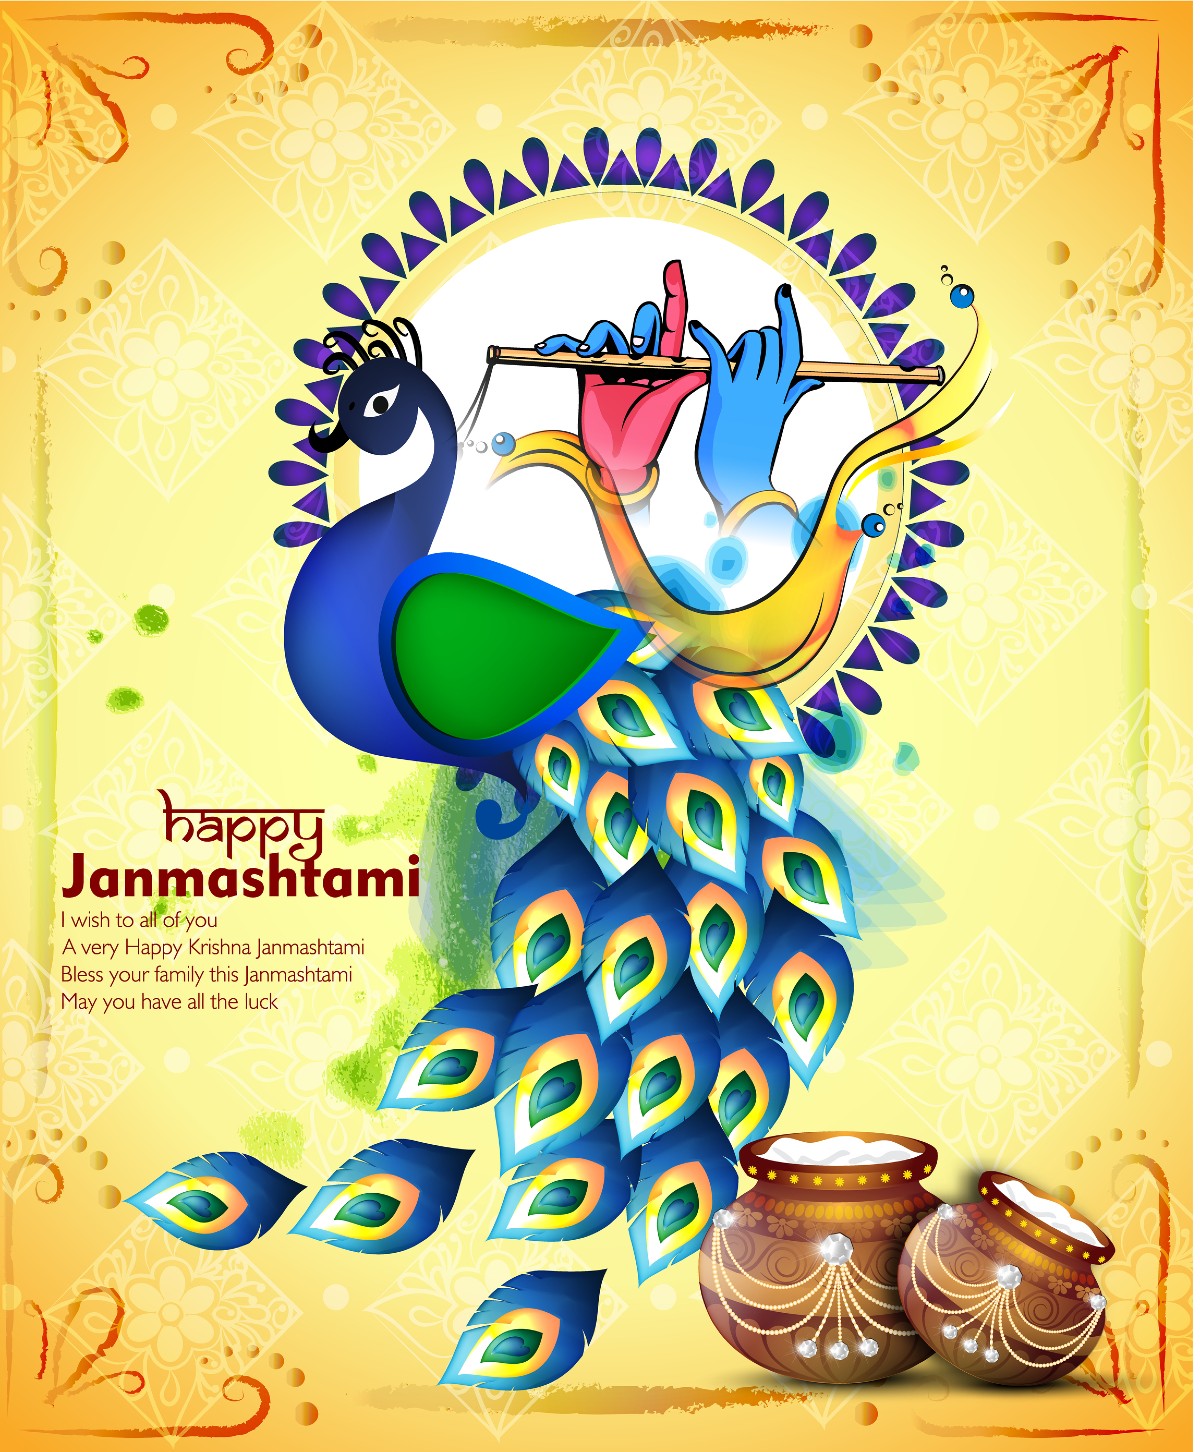 Happy Janmashtami 2021: Images, Wishes, Quotes, Messages and WhatsApp  Greetings to Share on Krishna Janmashtami Amid COVID-19